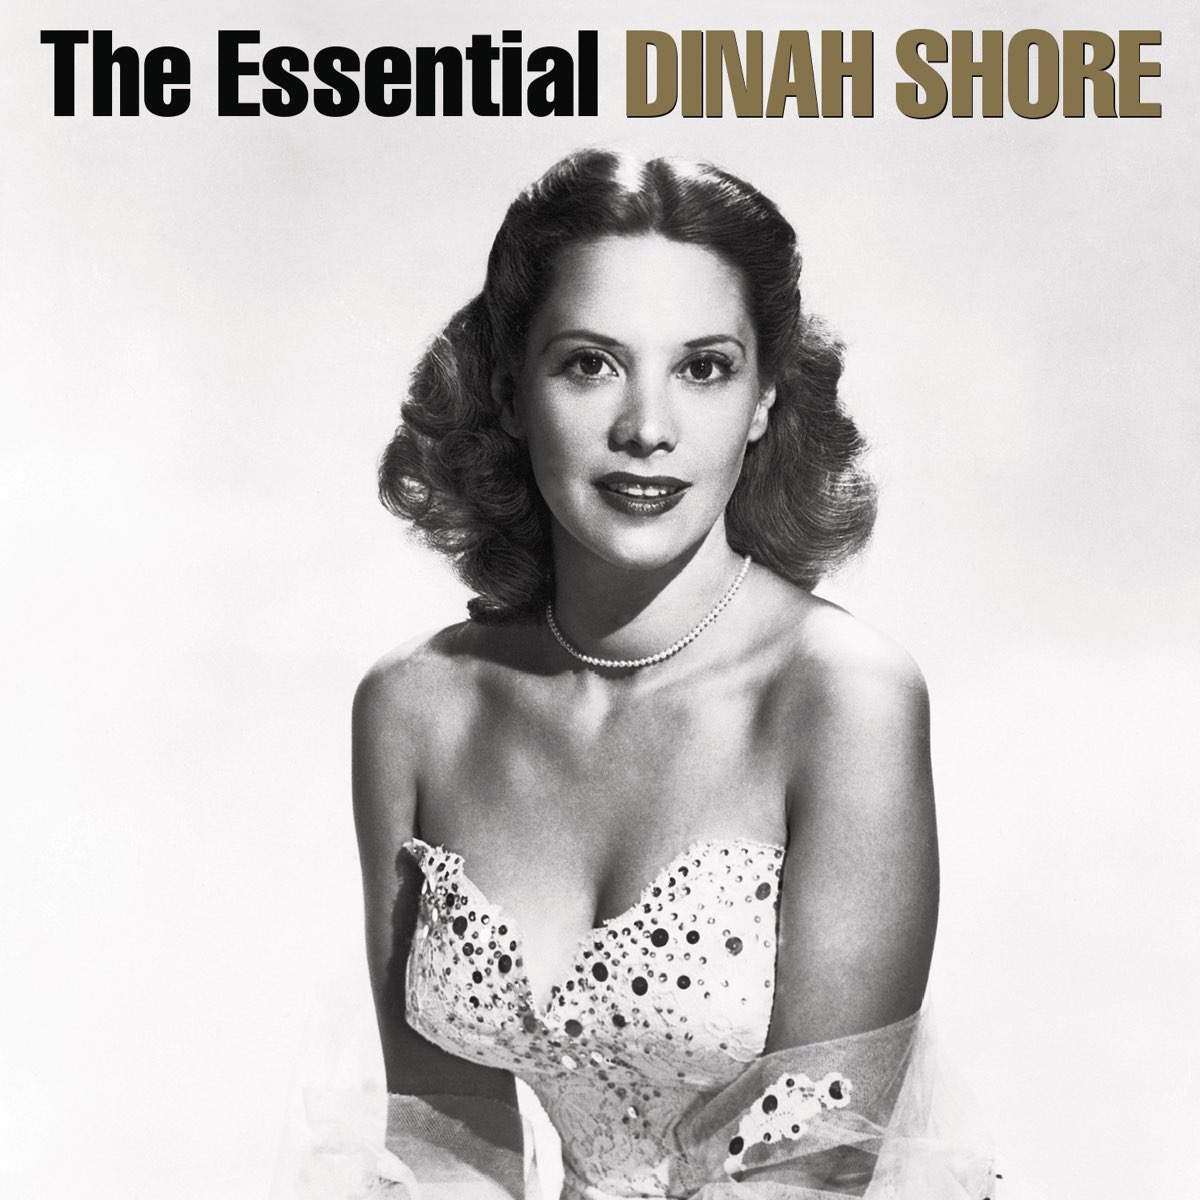 ‎The Essential Dinah Shore by Dinah Shore on Apple Music